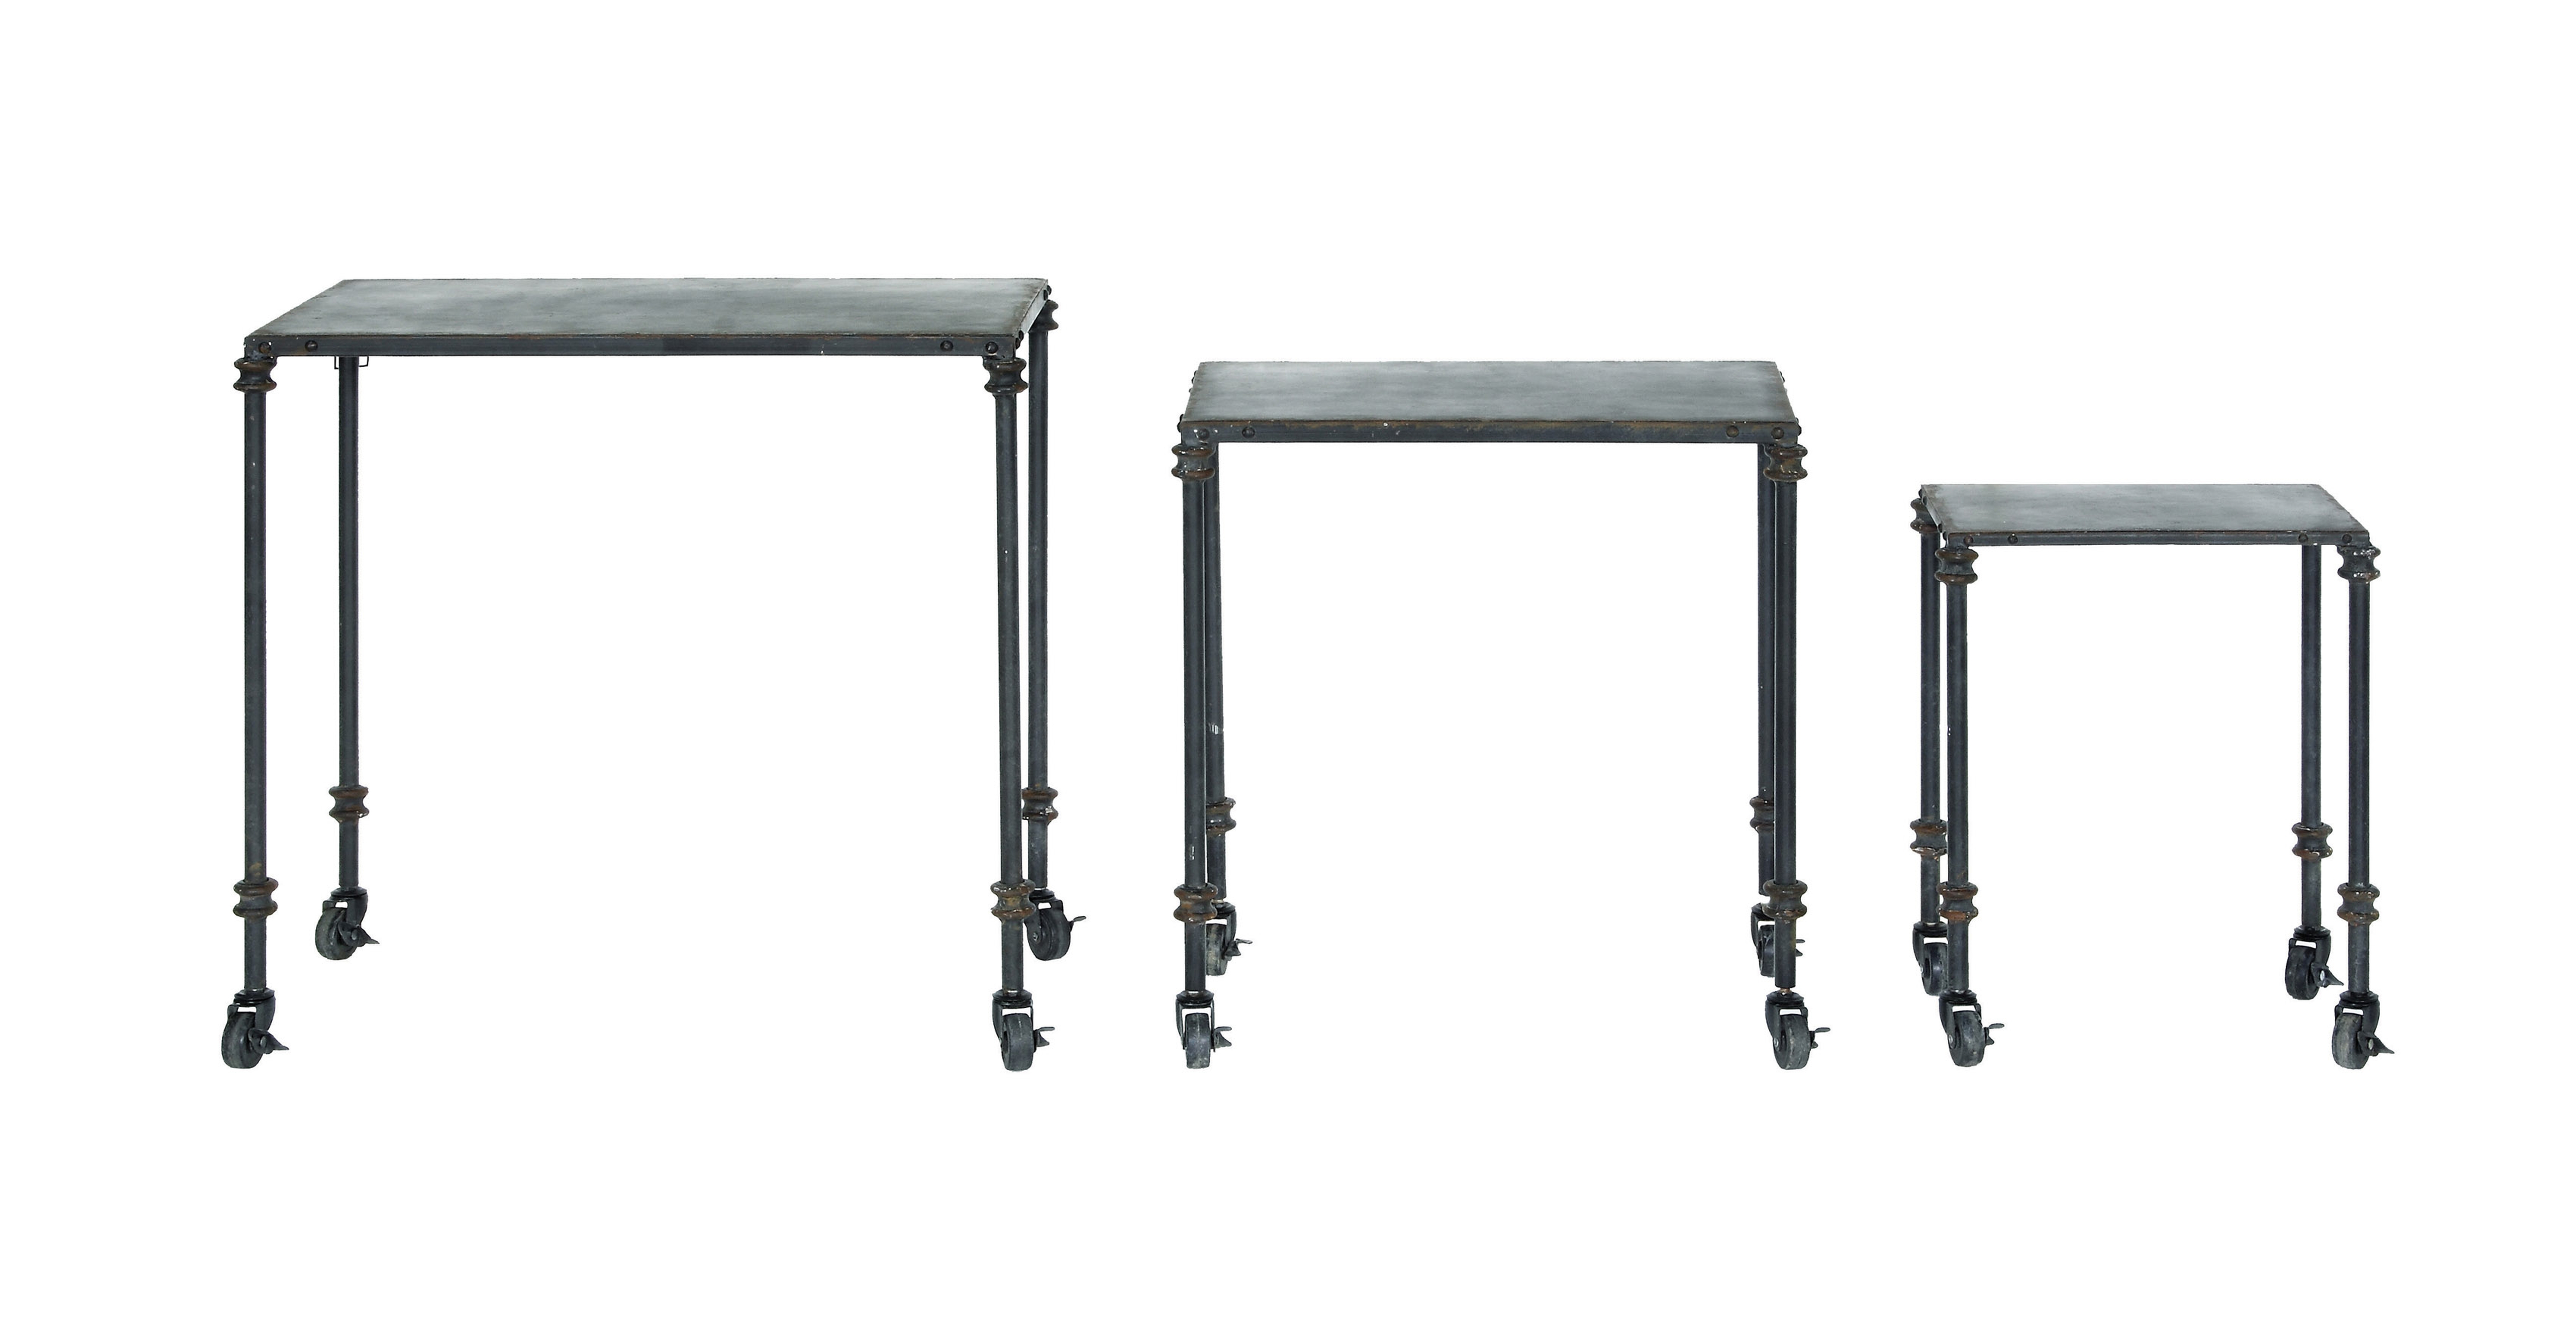 Black Metal Tables on Casters (Set of 3 Sizes) - Nomad Home